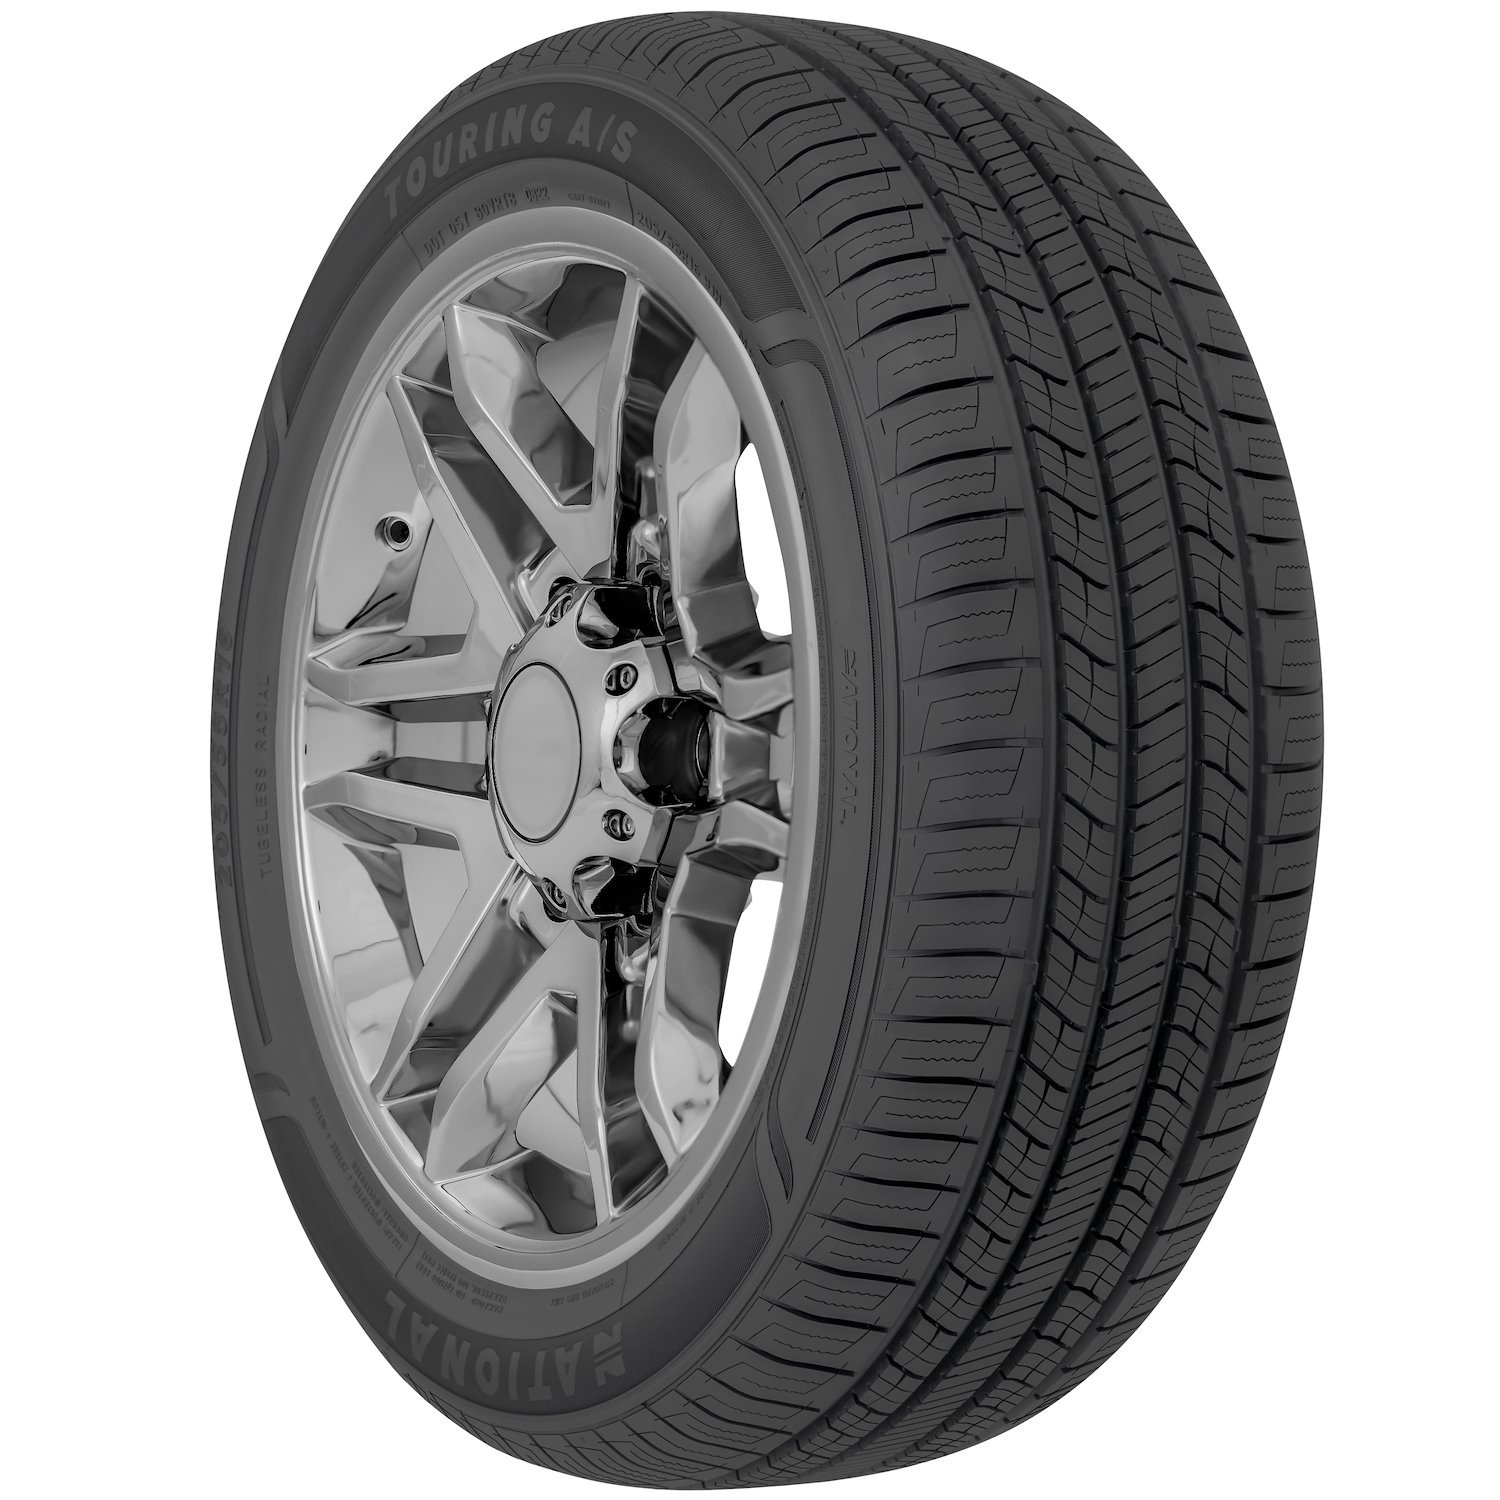 NLR34 Touring A/S Tire, 235/55R18